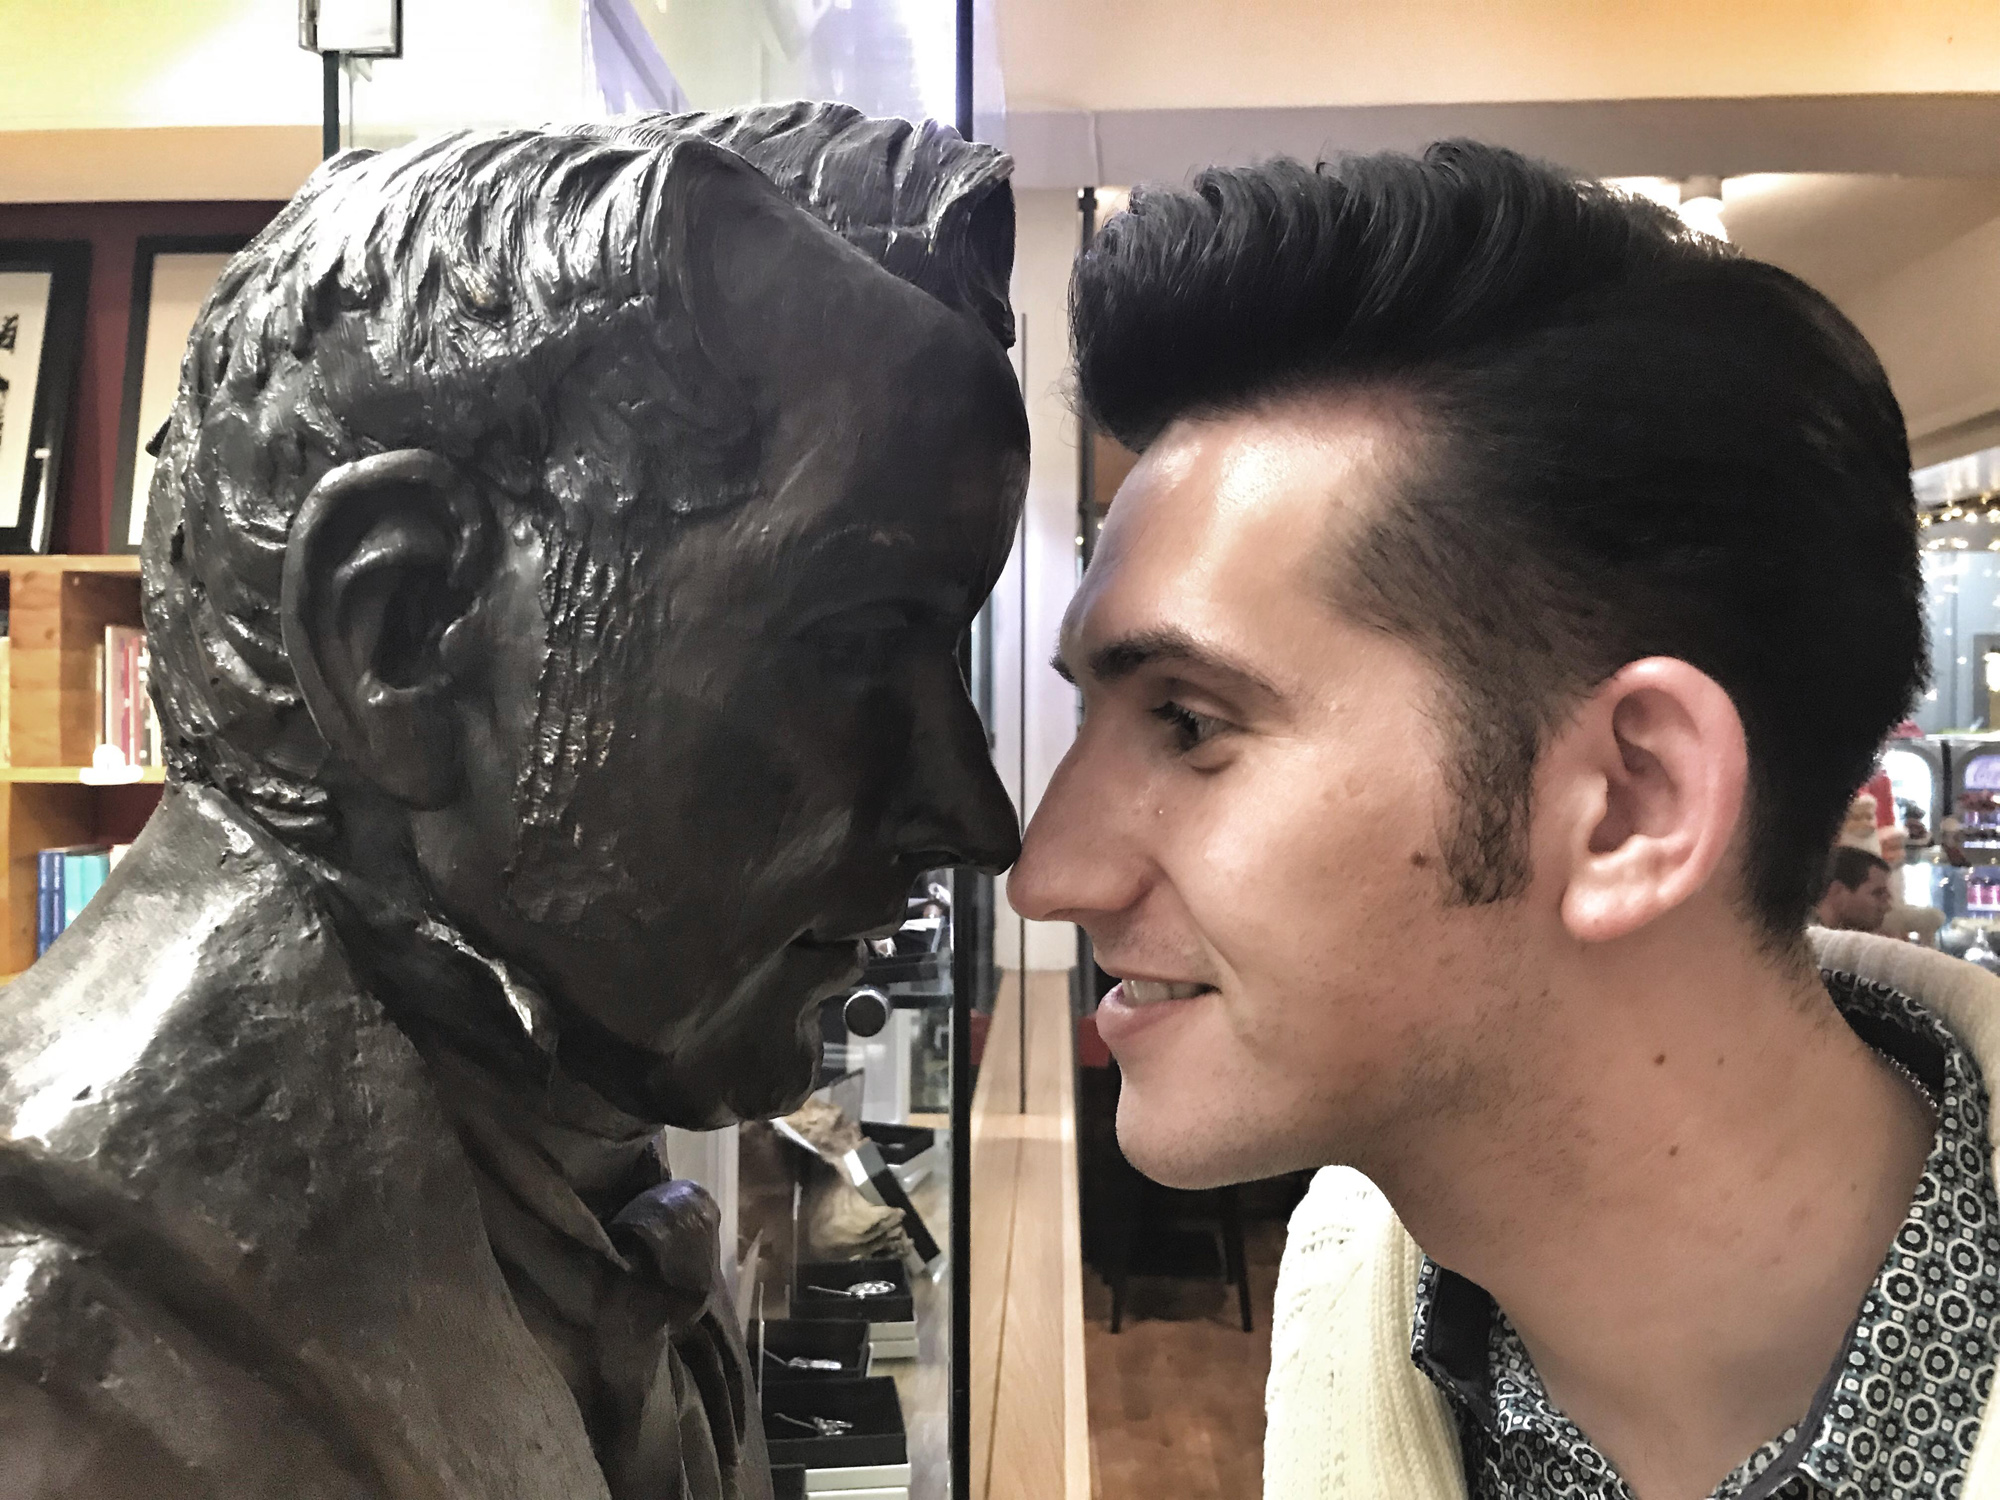 Louis McDonald was back in West Belfast from his new home in New Zealand this week and took the chance to exchange a traditional Maori \'hongi\' greeting with the Gaelic revivalist Robert McAdam on a visit to An Chultúrlann